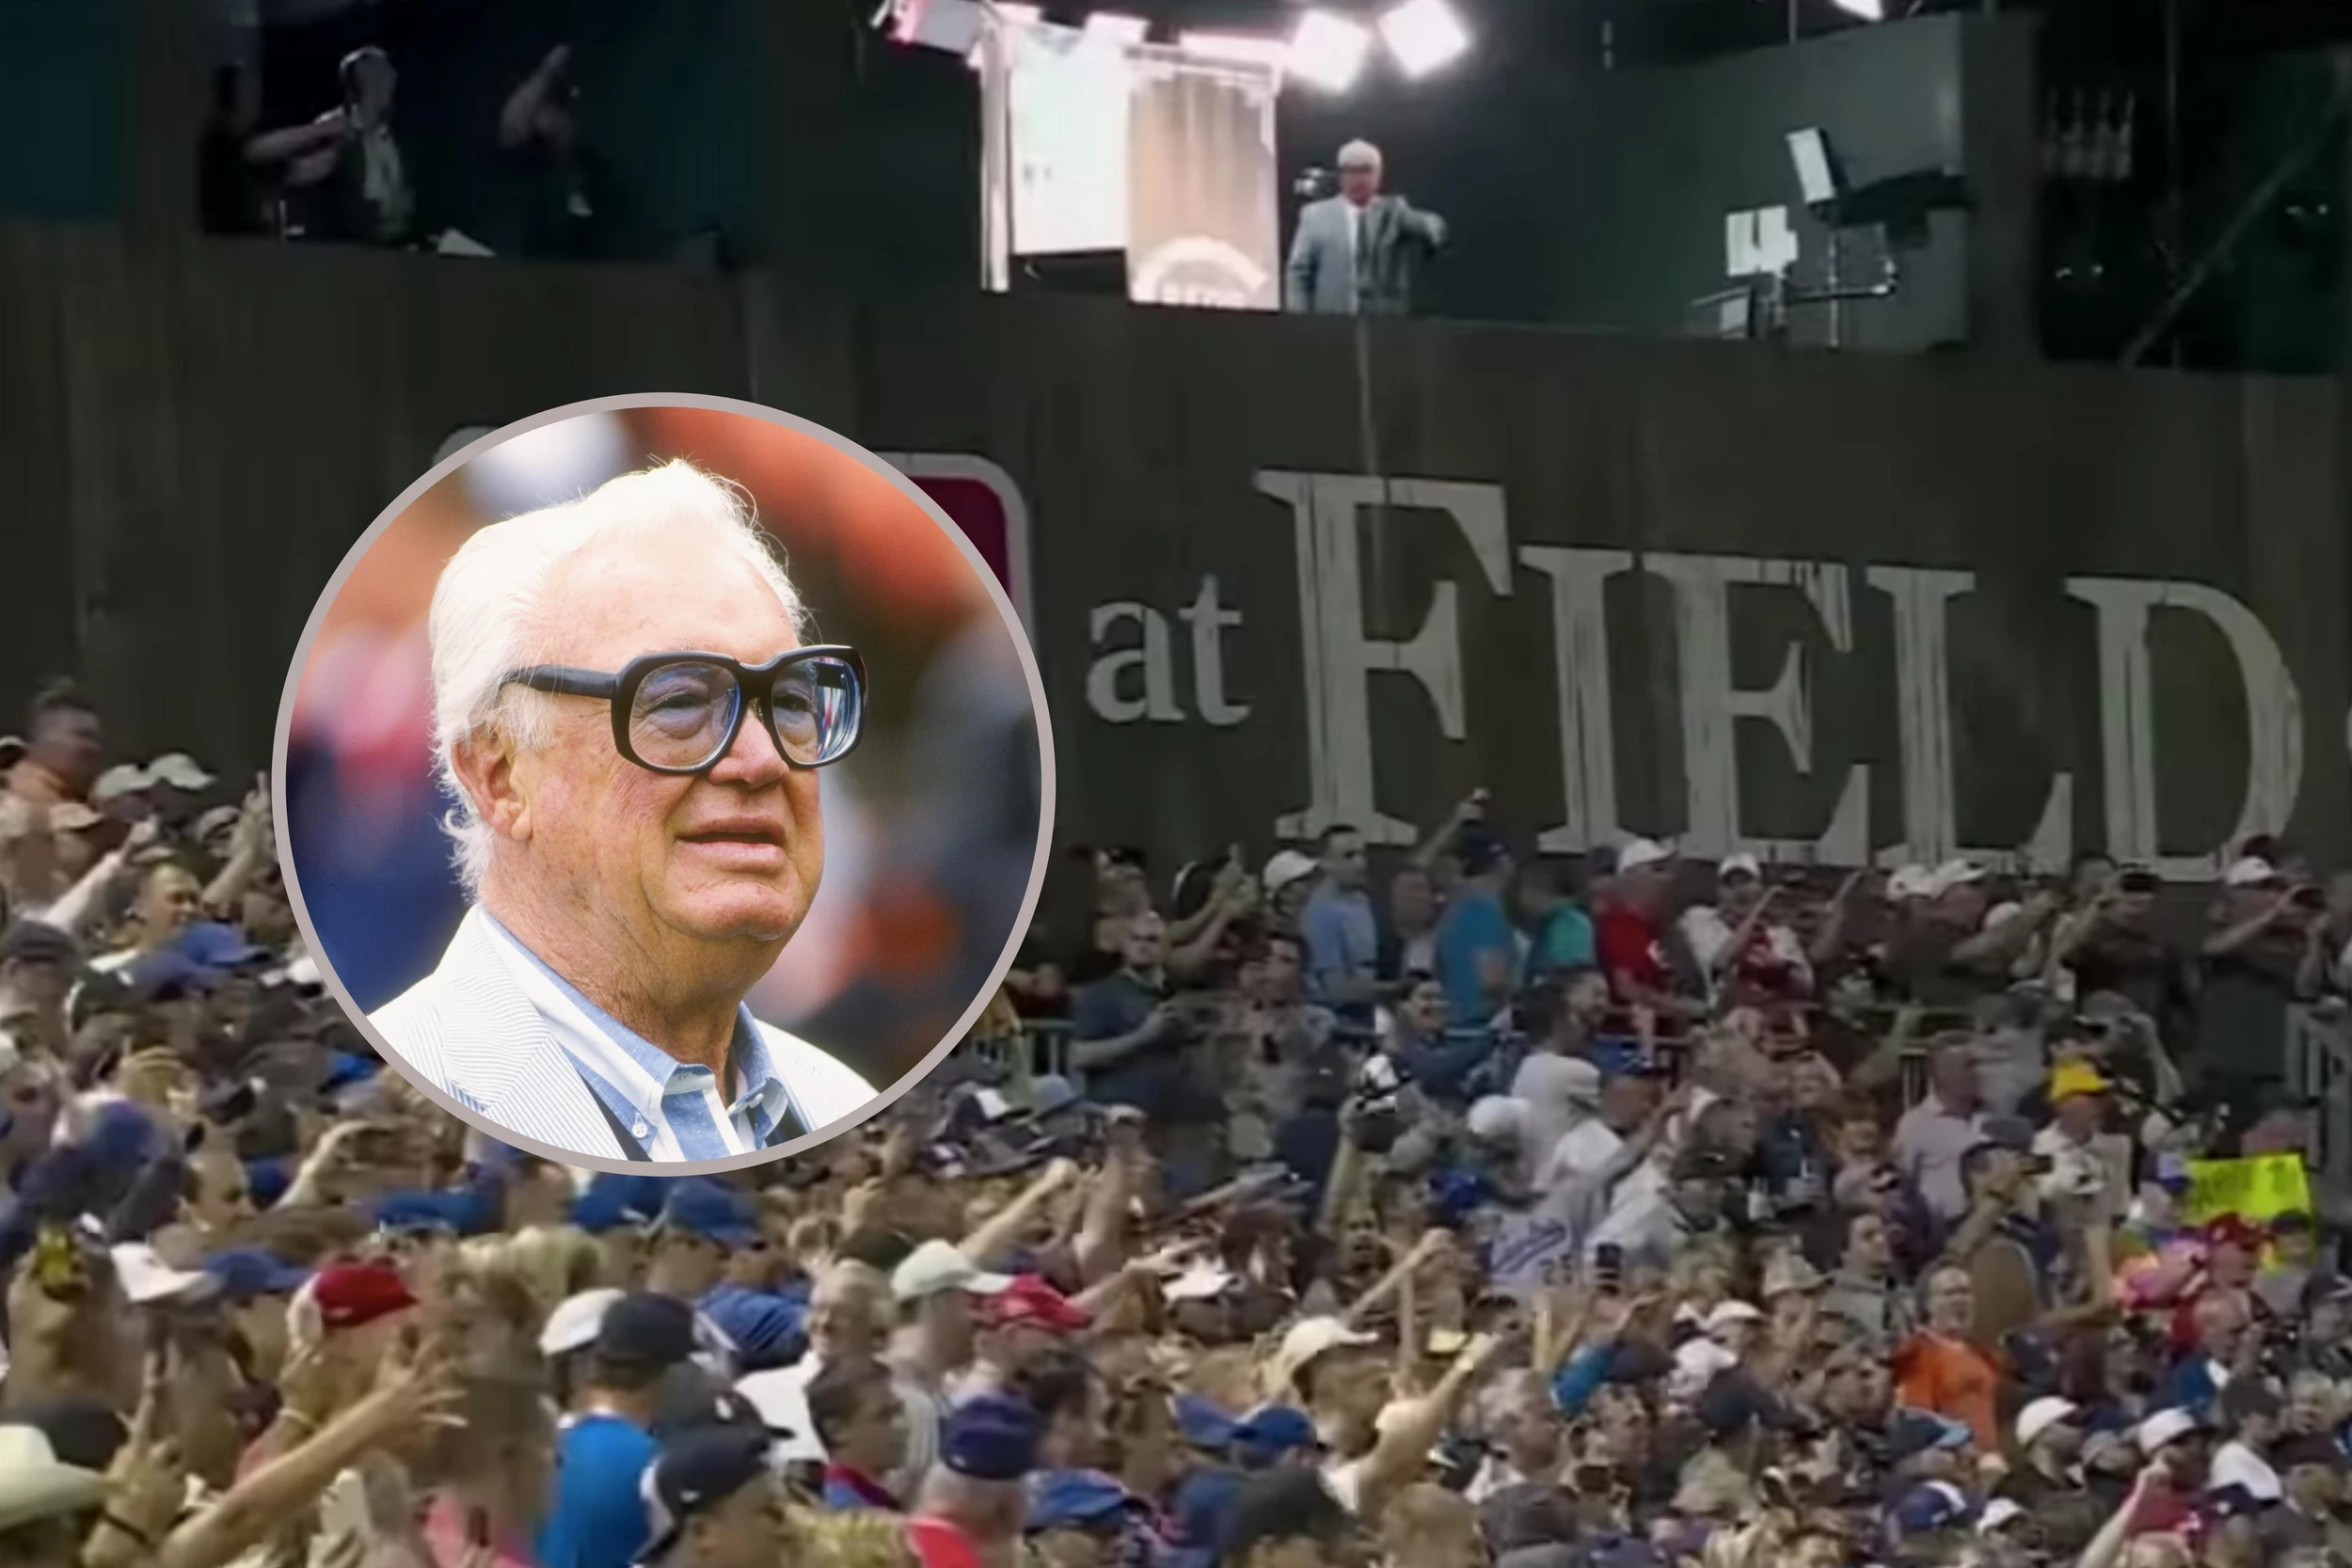 Harry Caray leads 'Field Of Dreams' crowd in rendition of 'Take Me